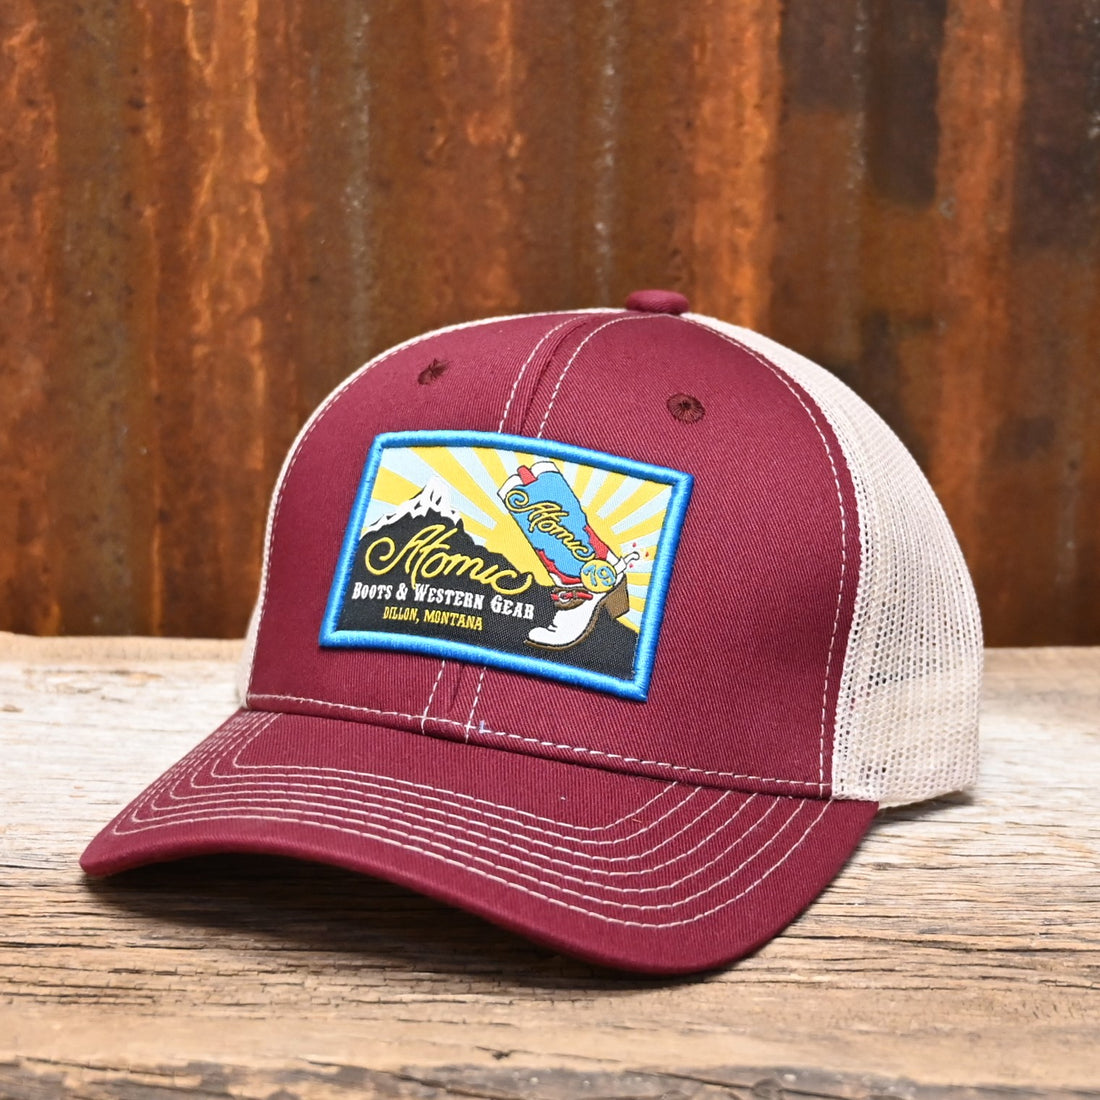 Atomic 79Trucker Cap with Sunrise Patch on Maroon view of hat